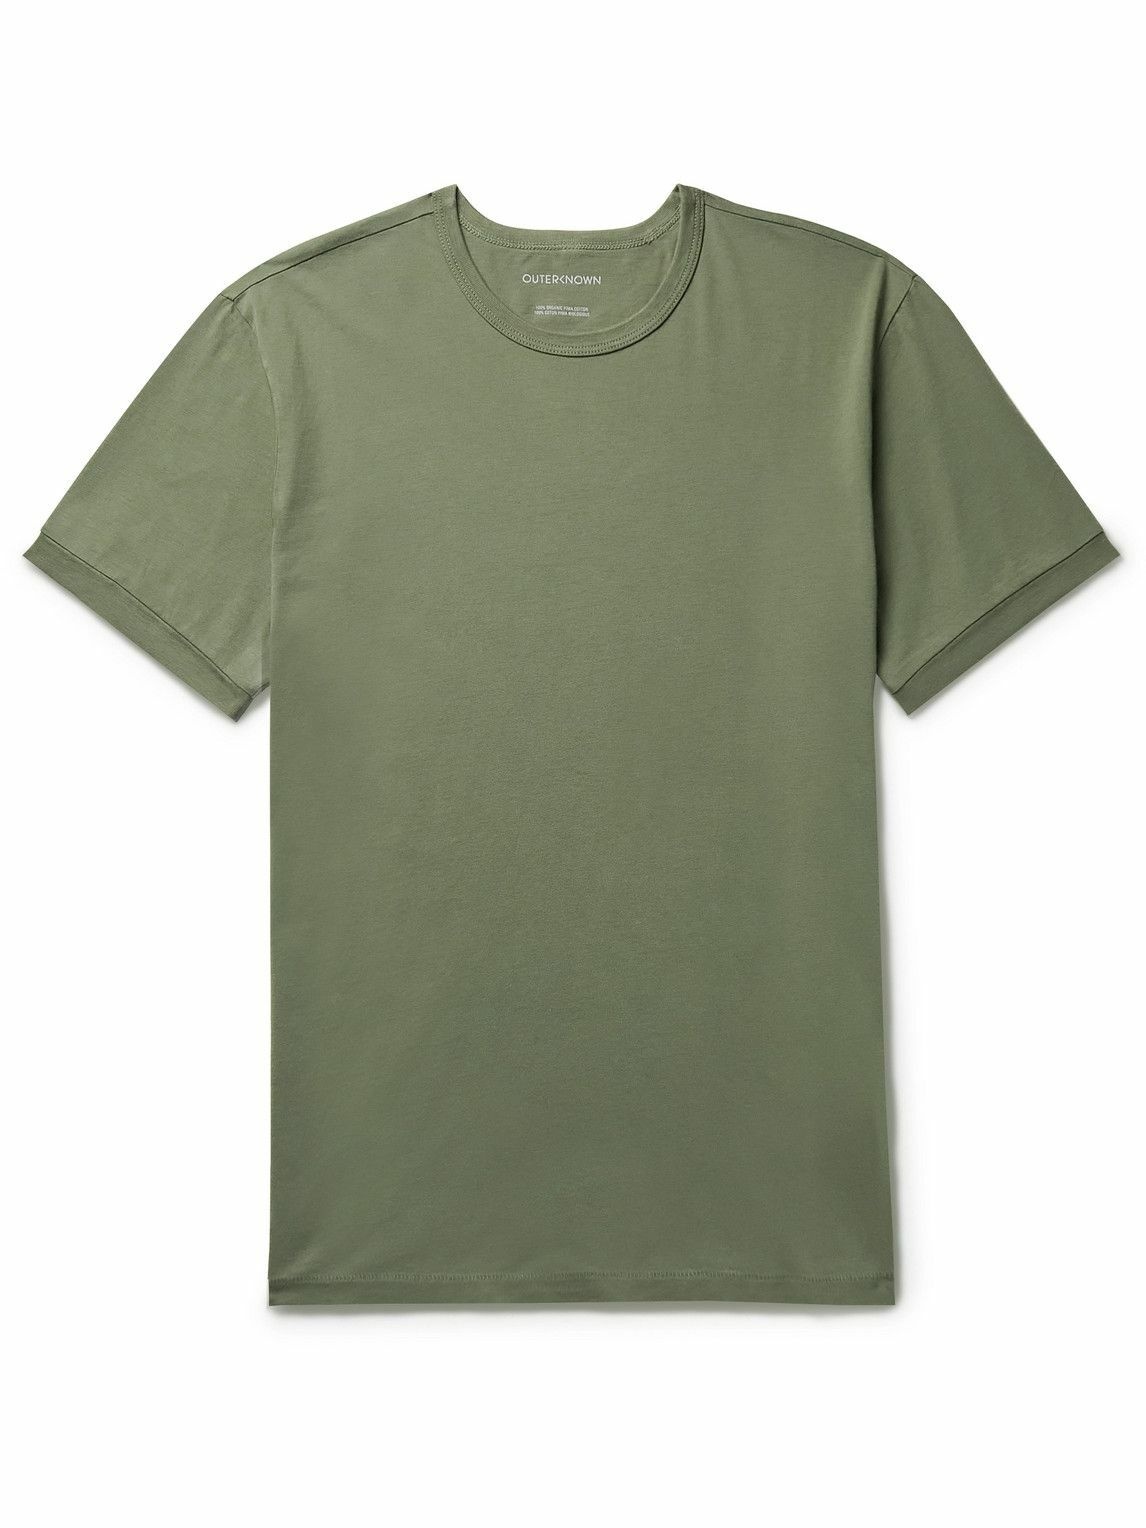 Outerknown - Sojourn Organic Pima Cotton-Jersey T-Shirt - Green Outerknown